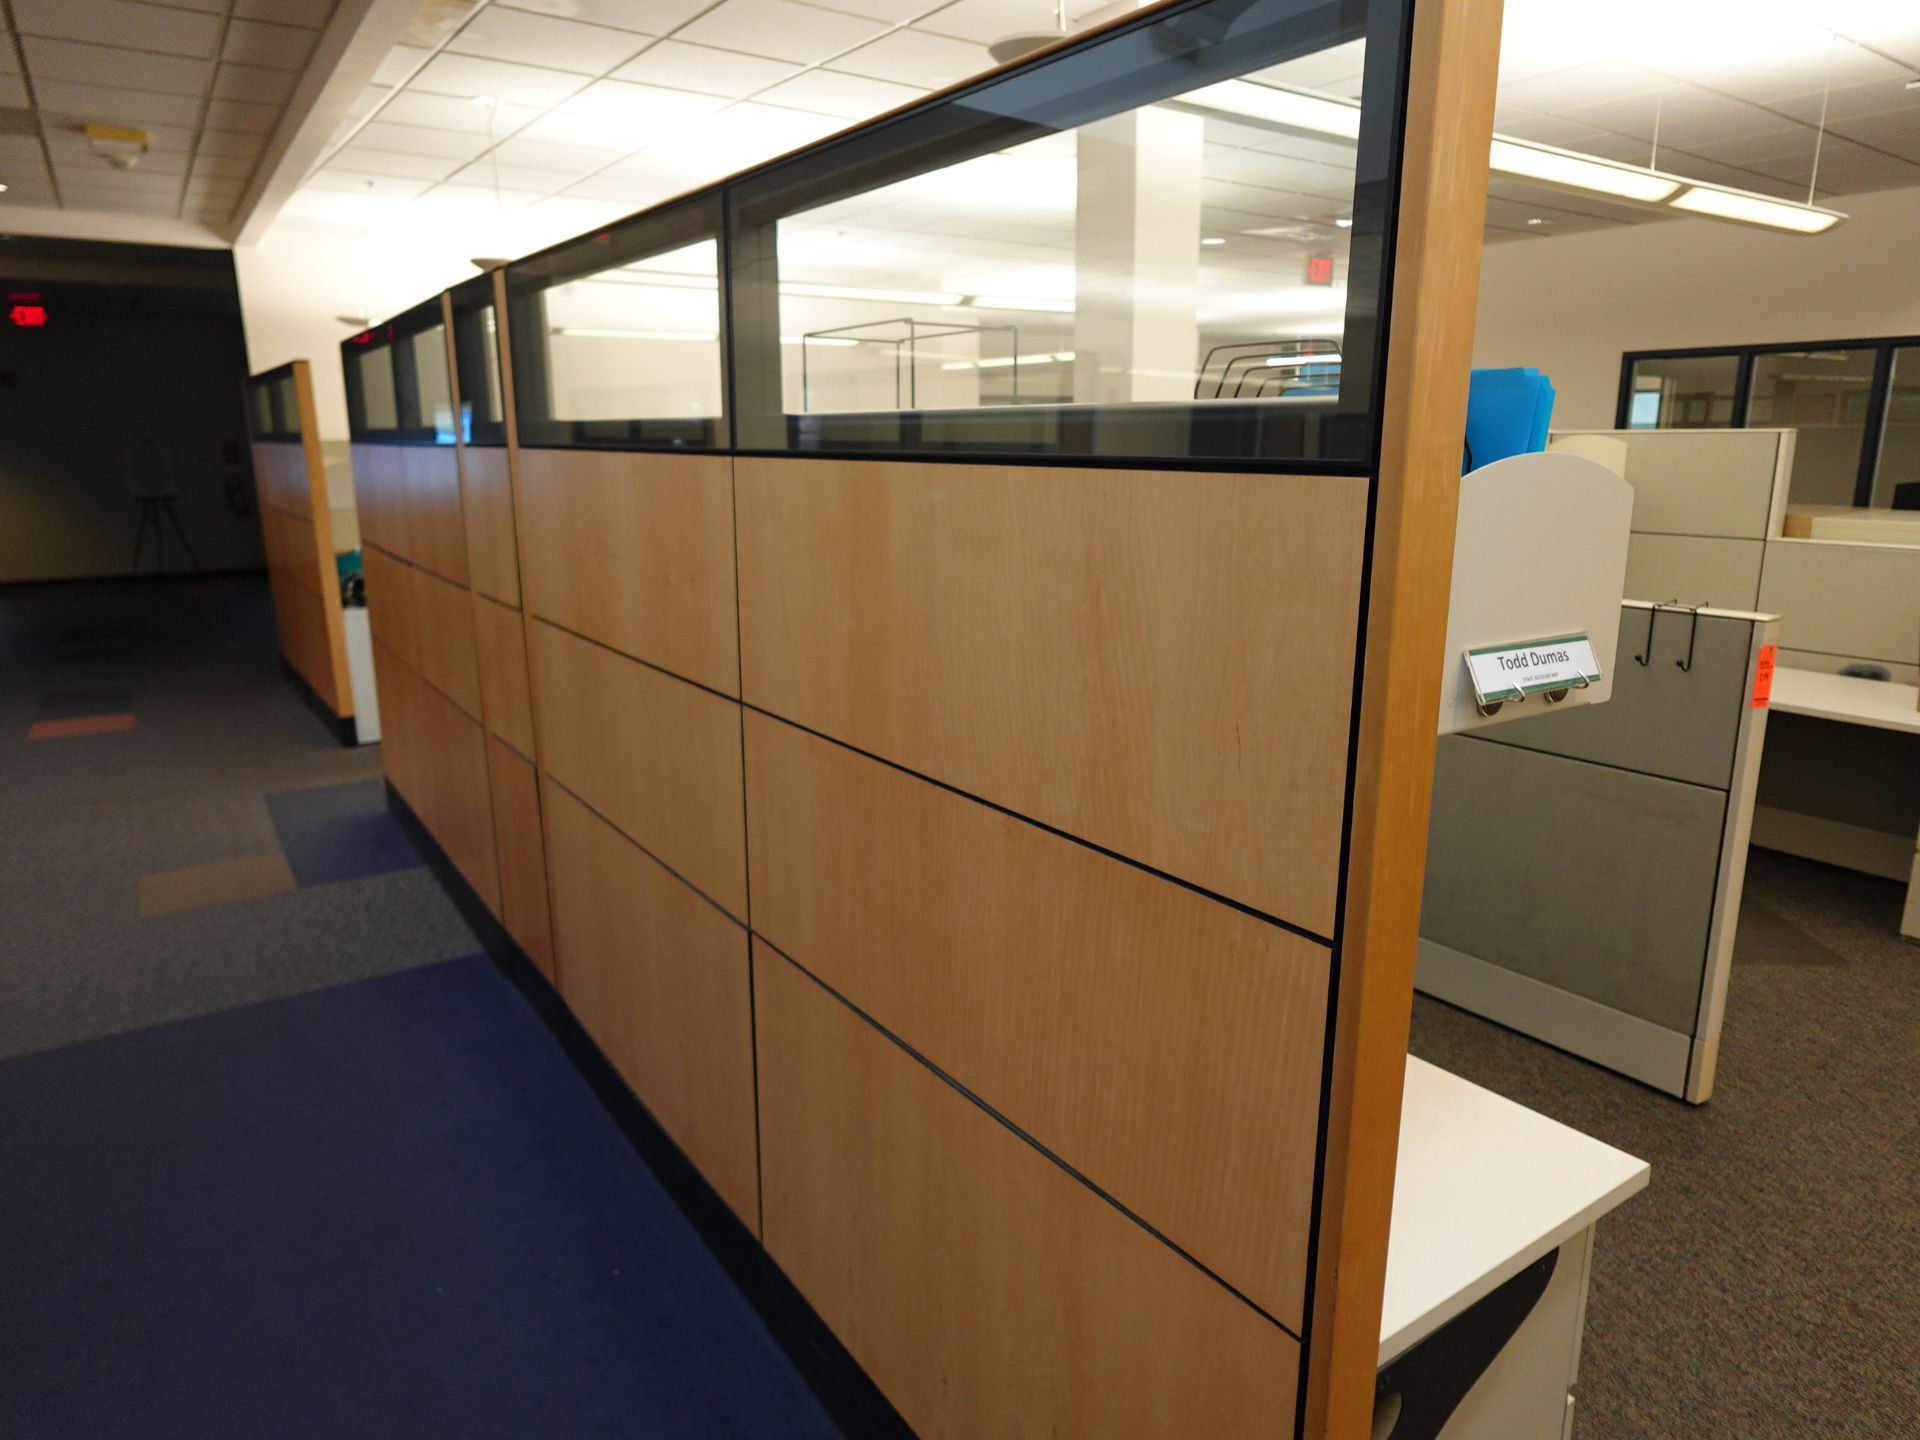 Haworth Office Cubicals - Image 5 of 5